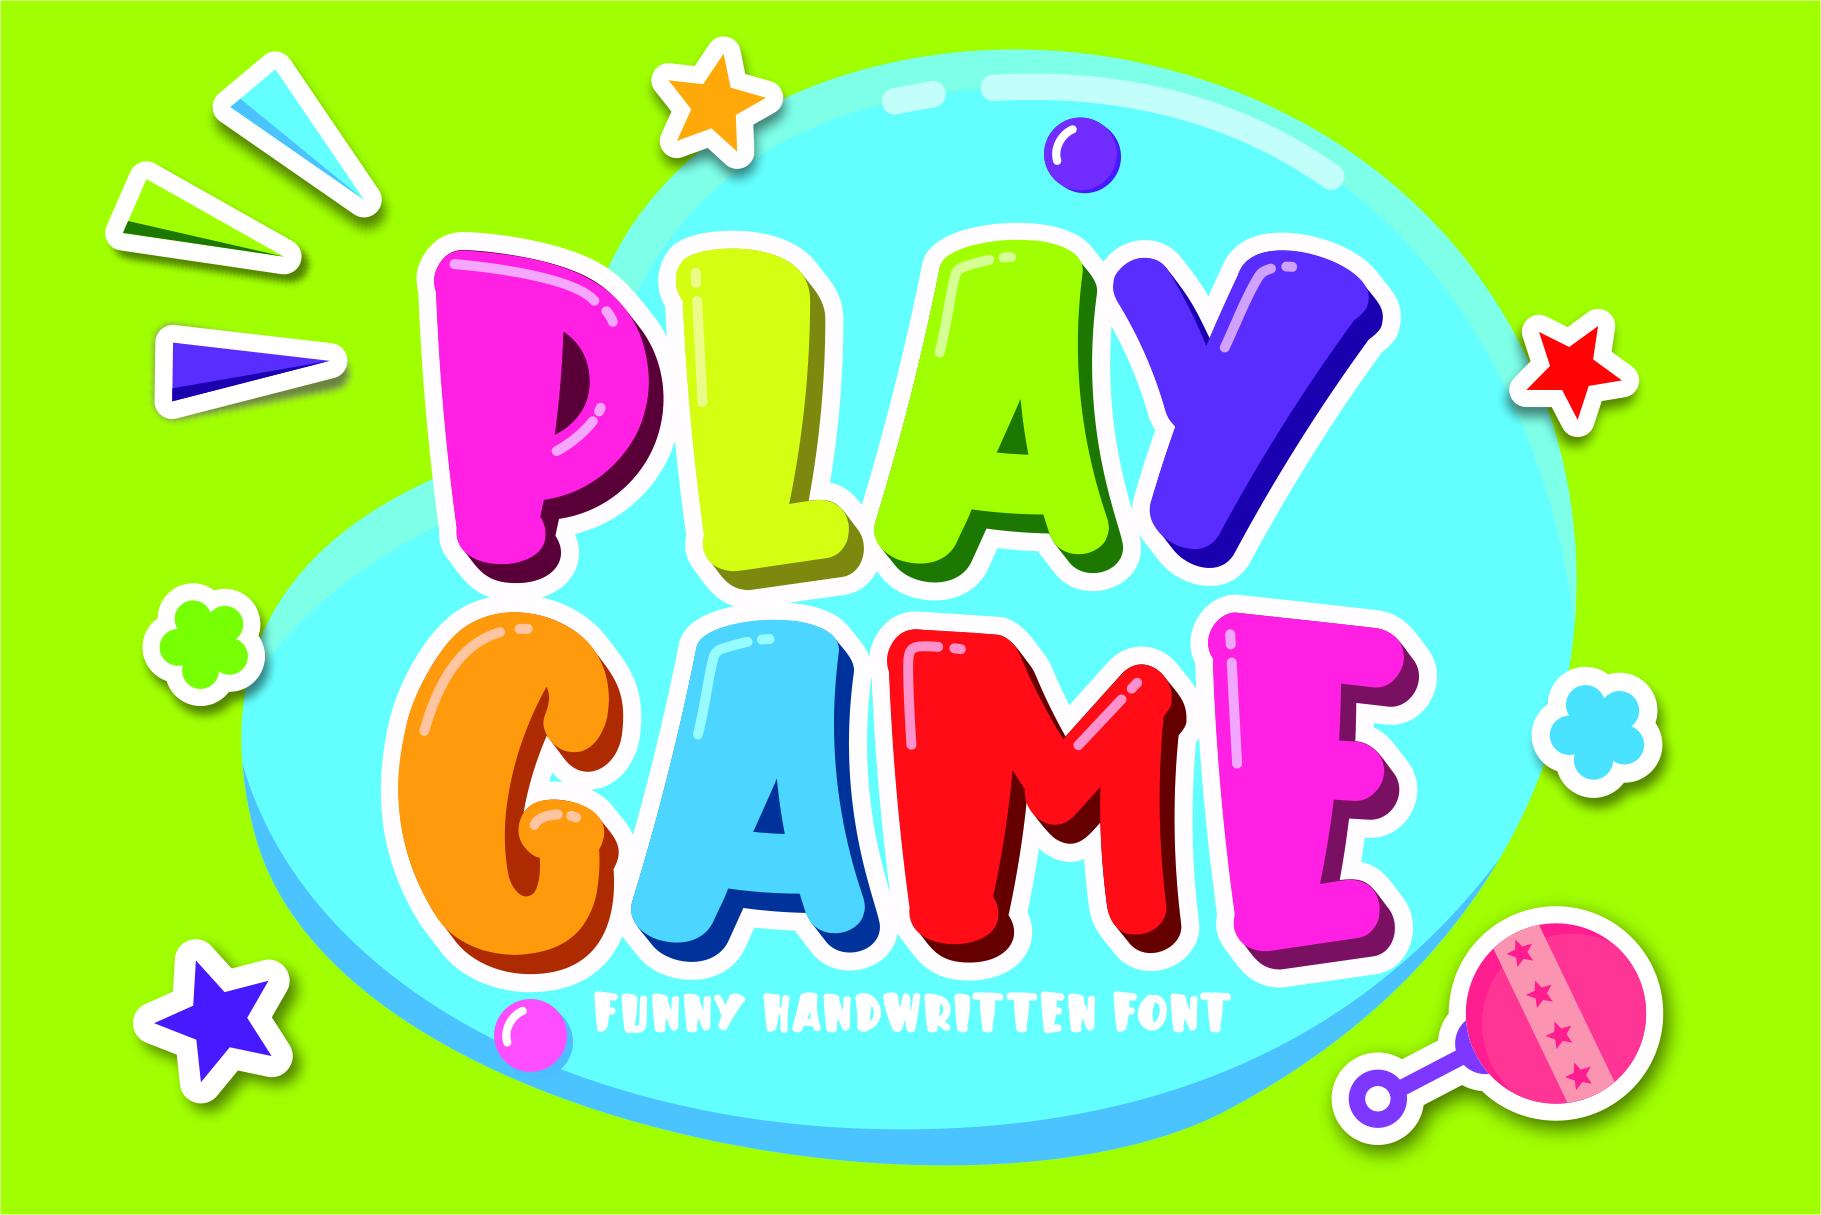 Play Game Font